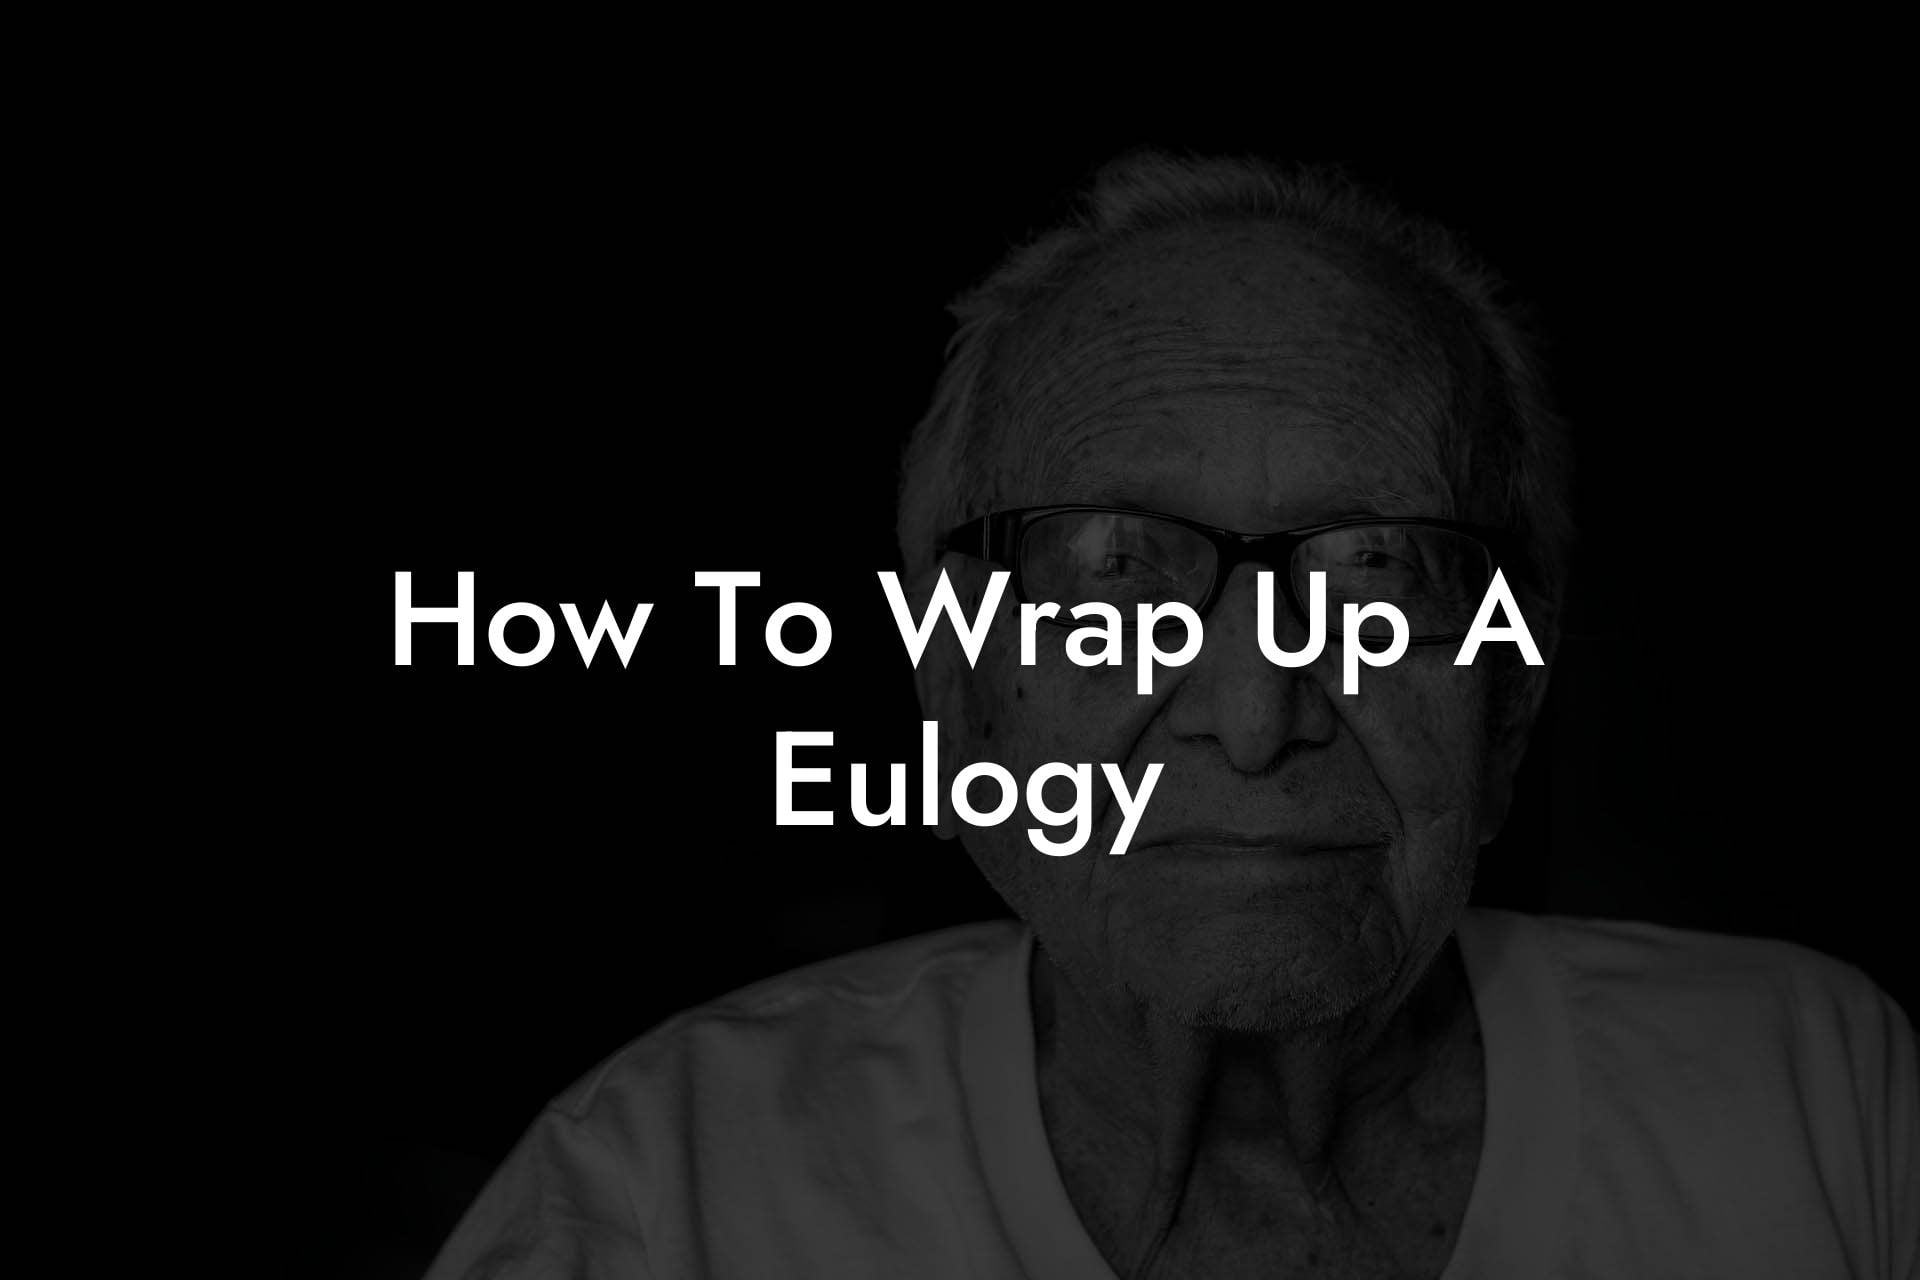 How To Wrap Up A Eulogy